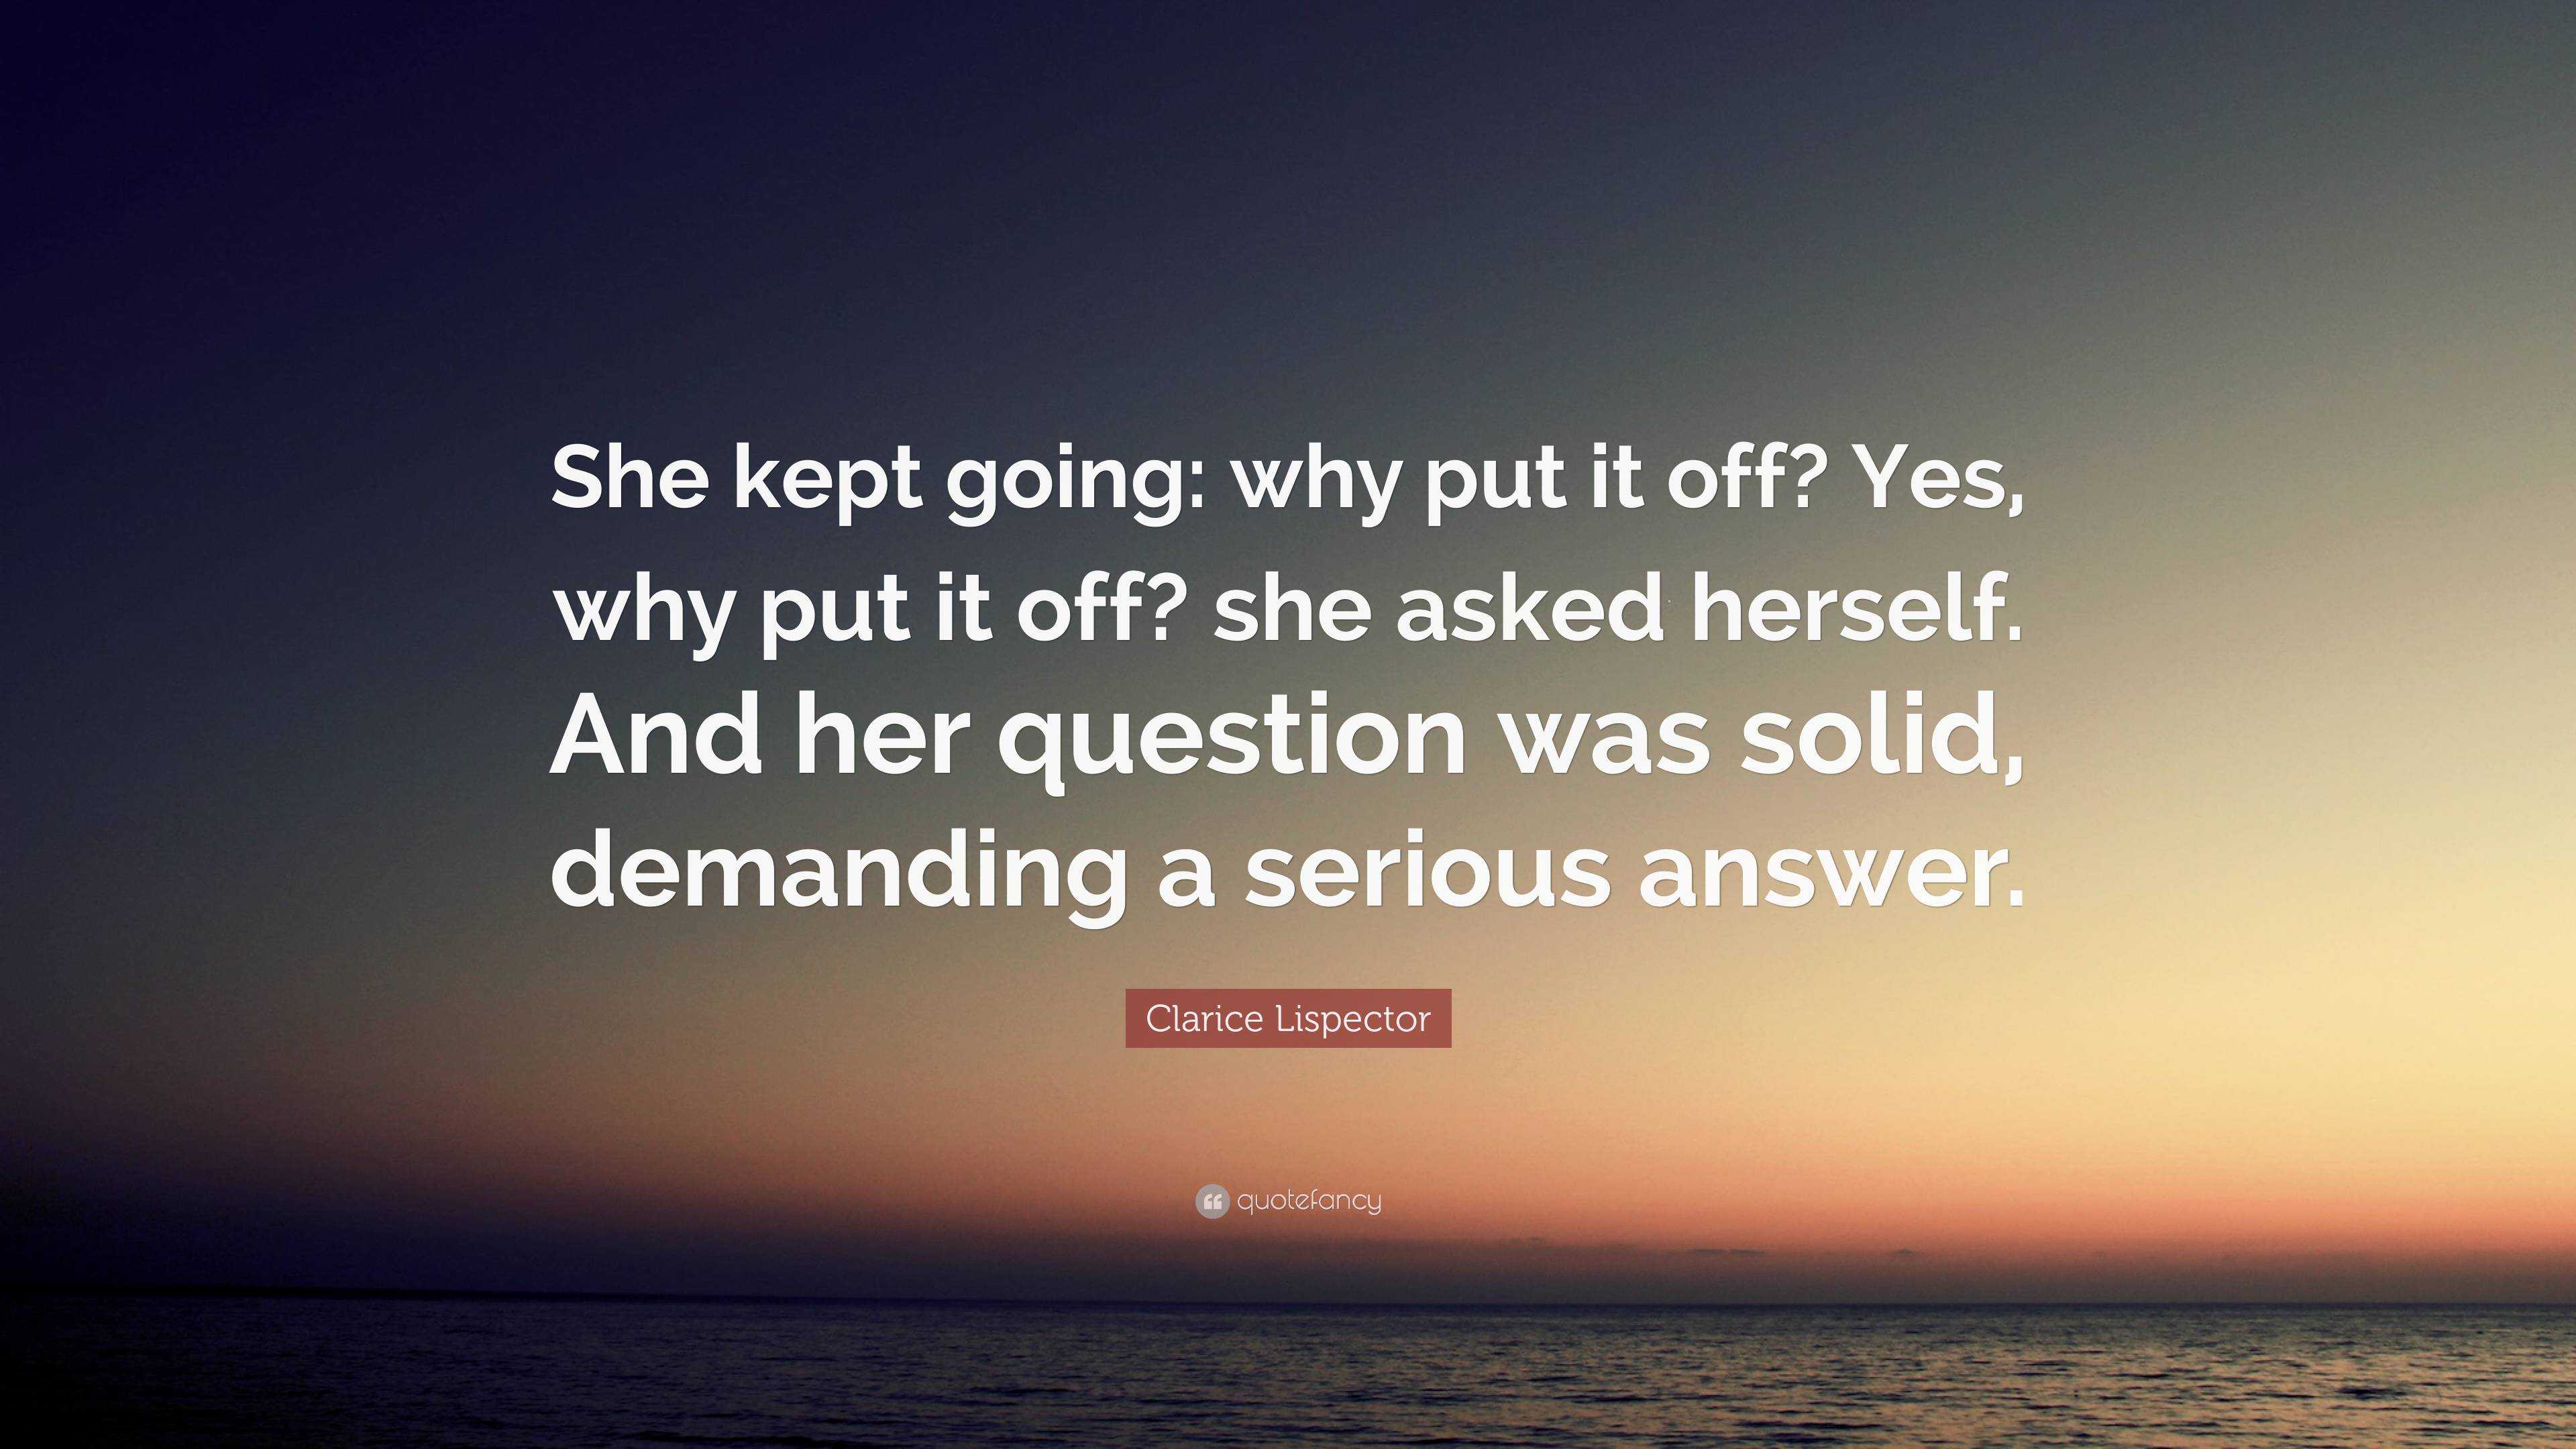 Clarice Lispector Quote: “She kept going: why put it off? Yes, why put ...